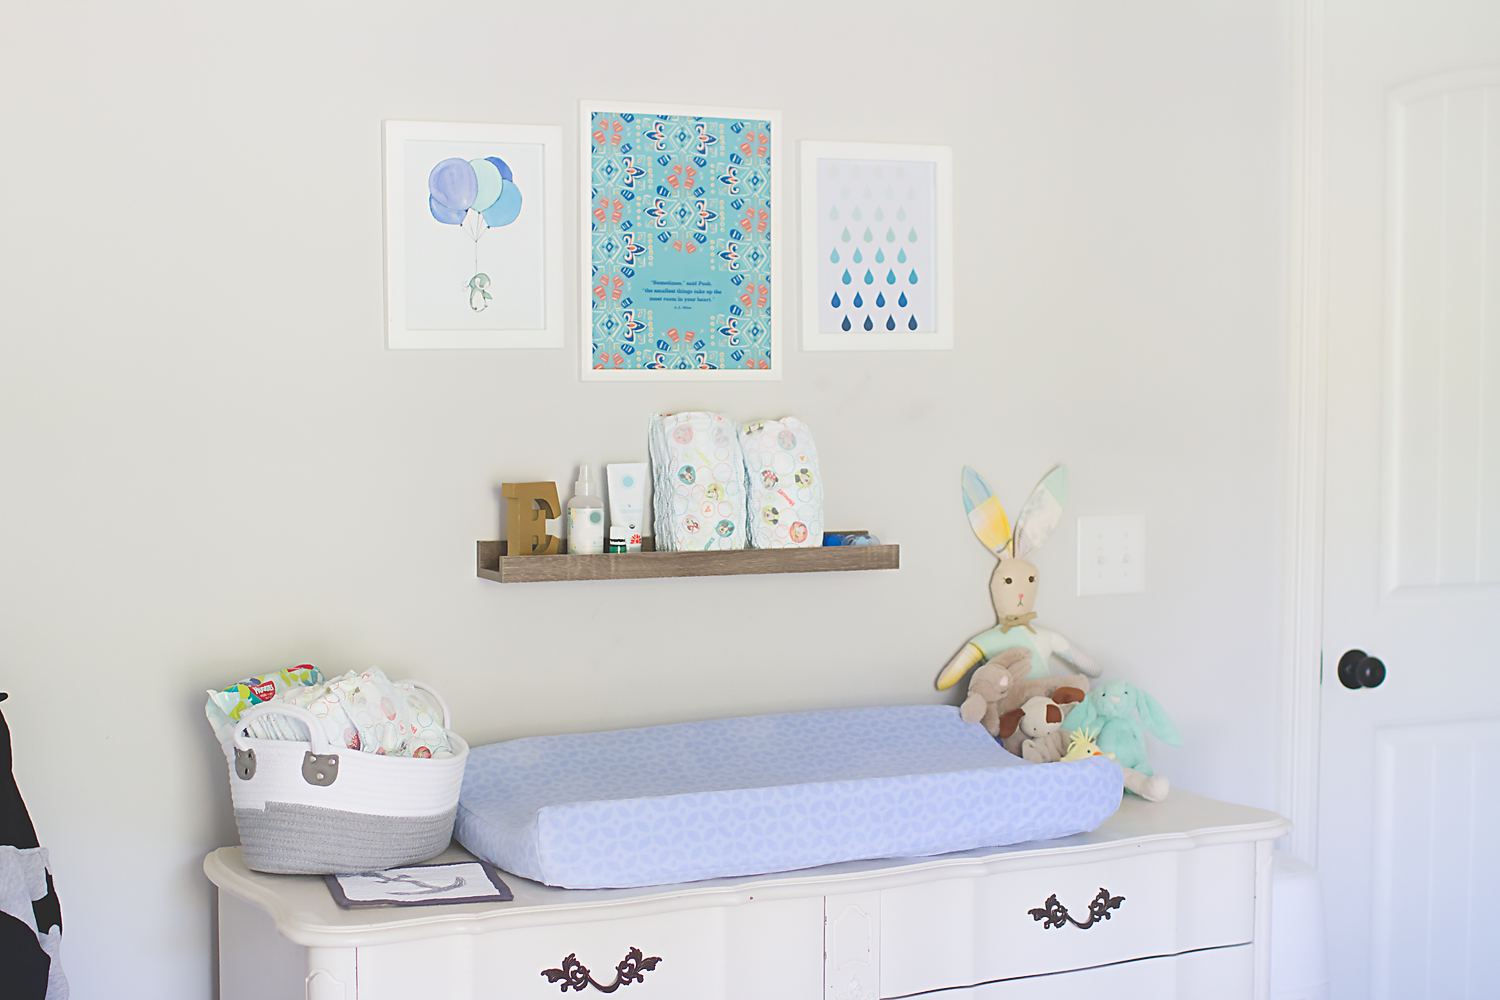 CREATING A TRANSITIONAL NURSERY: FROM BABY TO KID | TIPS